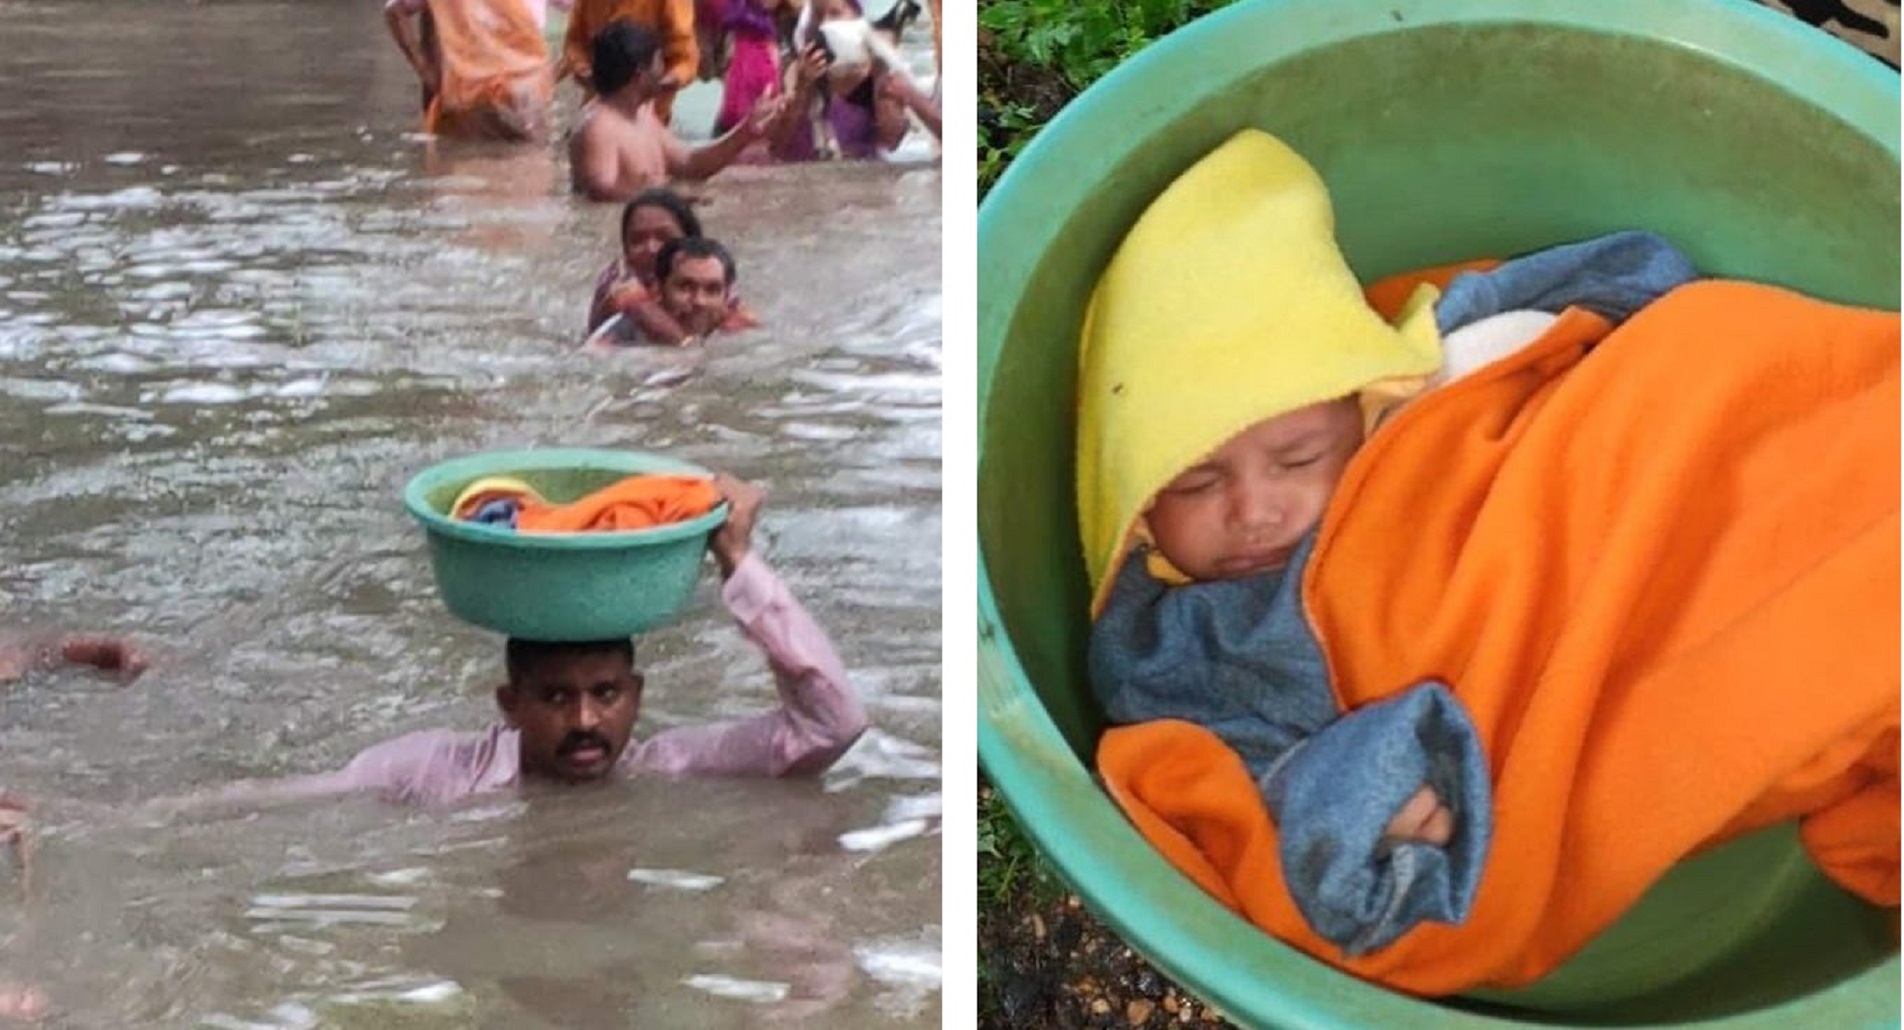 Gujarat Floods: Cop Saves Baby by Carrying Her in a Tub Over His Head